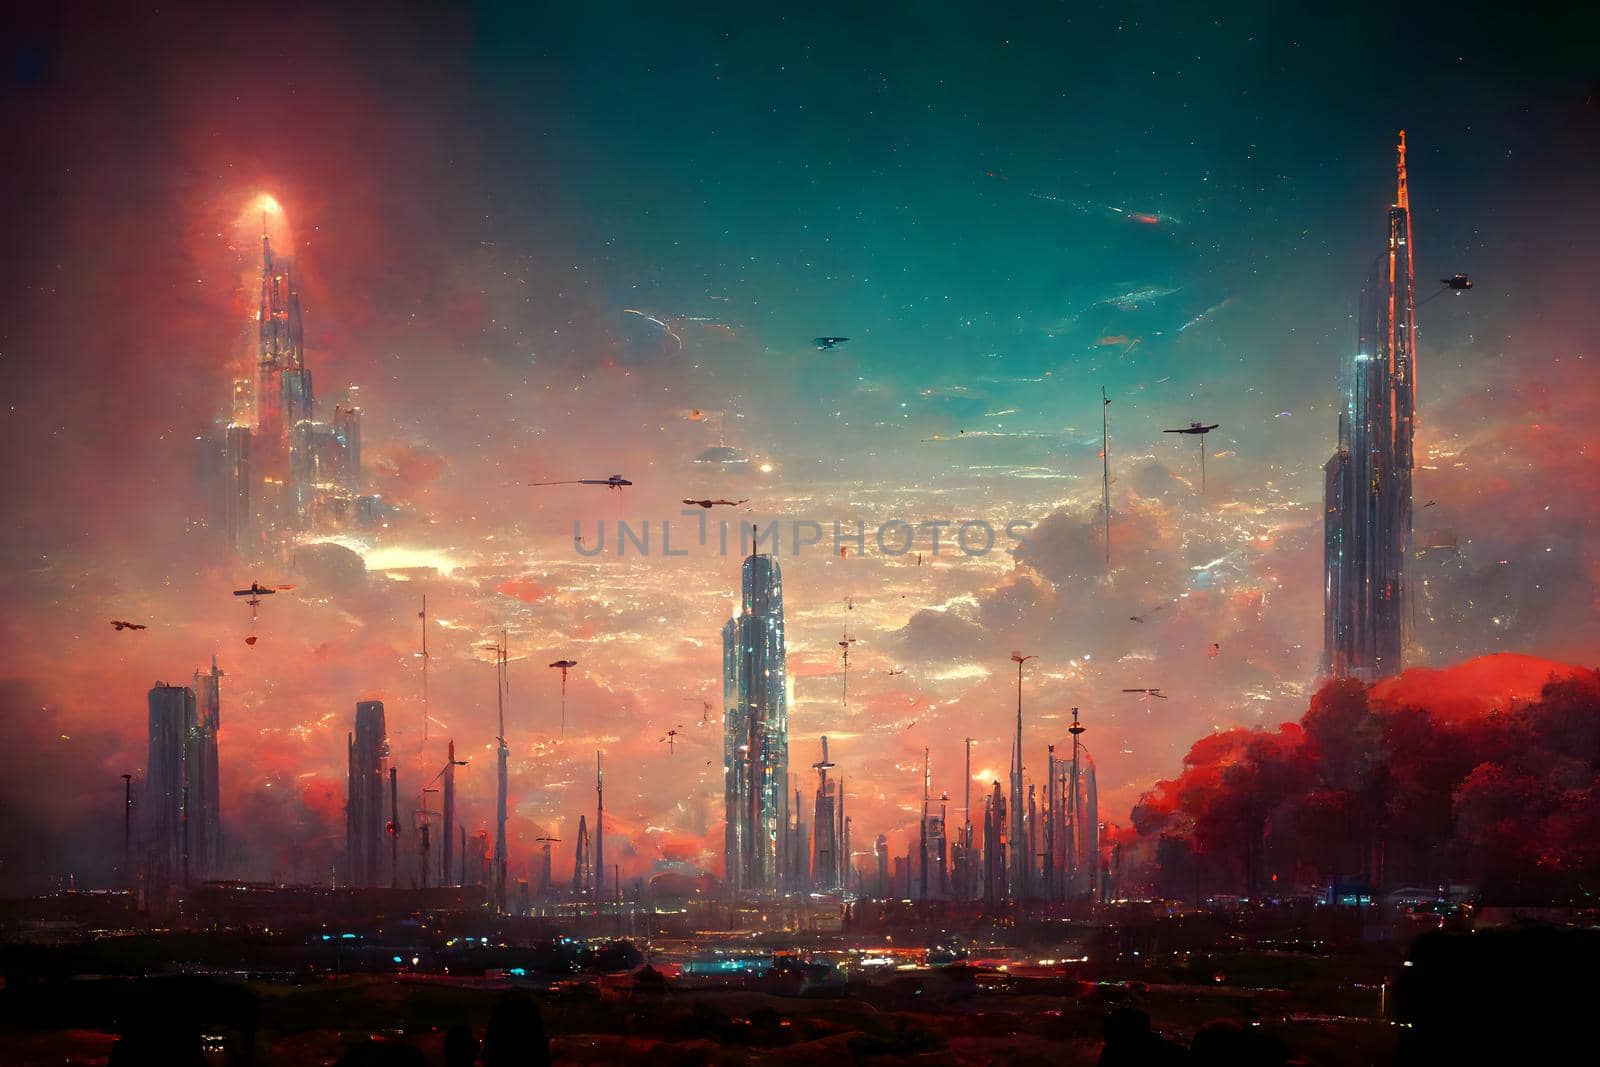 dreamy futuristic city in space with colorful clouds and high rise spire-like skyscrapers, neural network generated painting art. Digitally generated image. Not based on any actual scene or pattern.